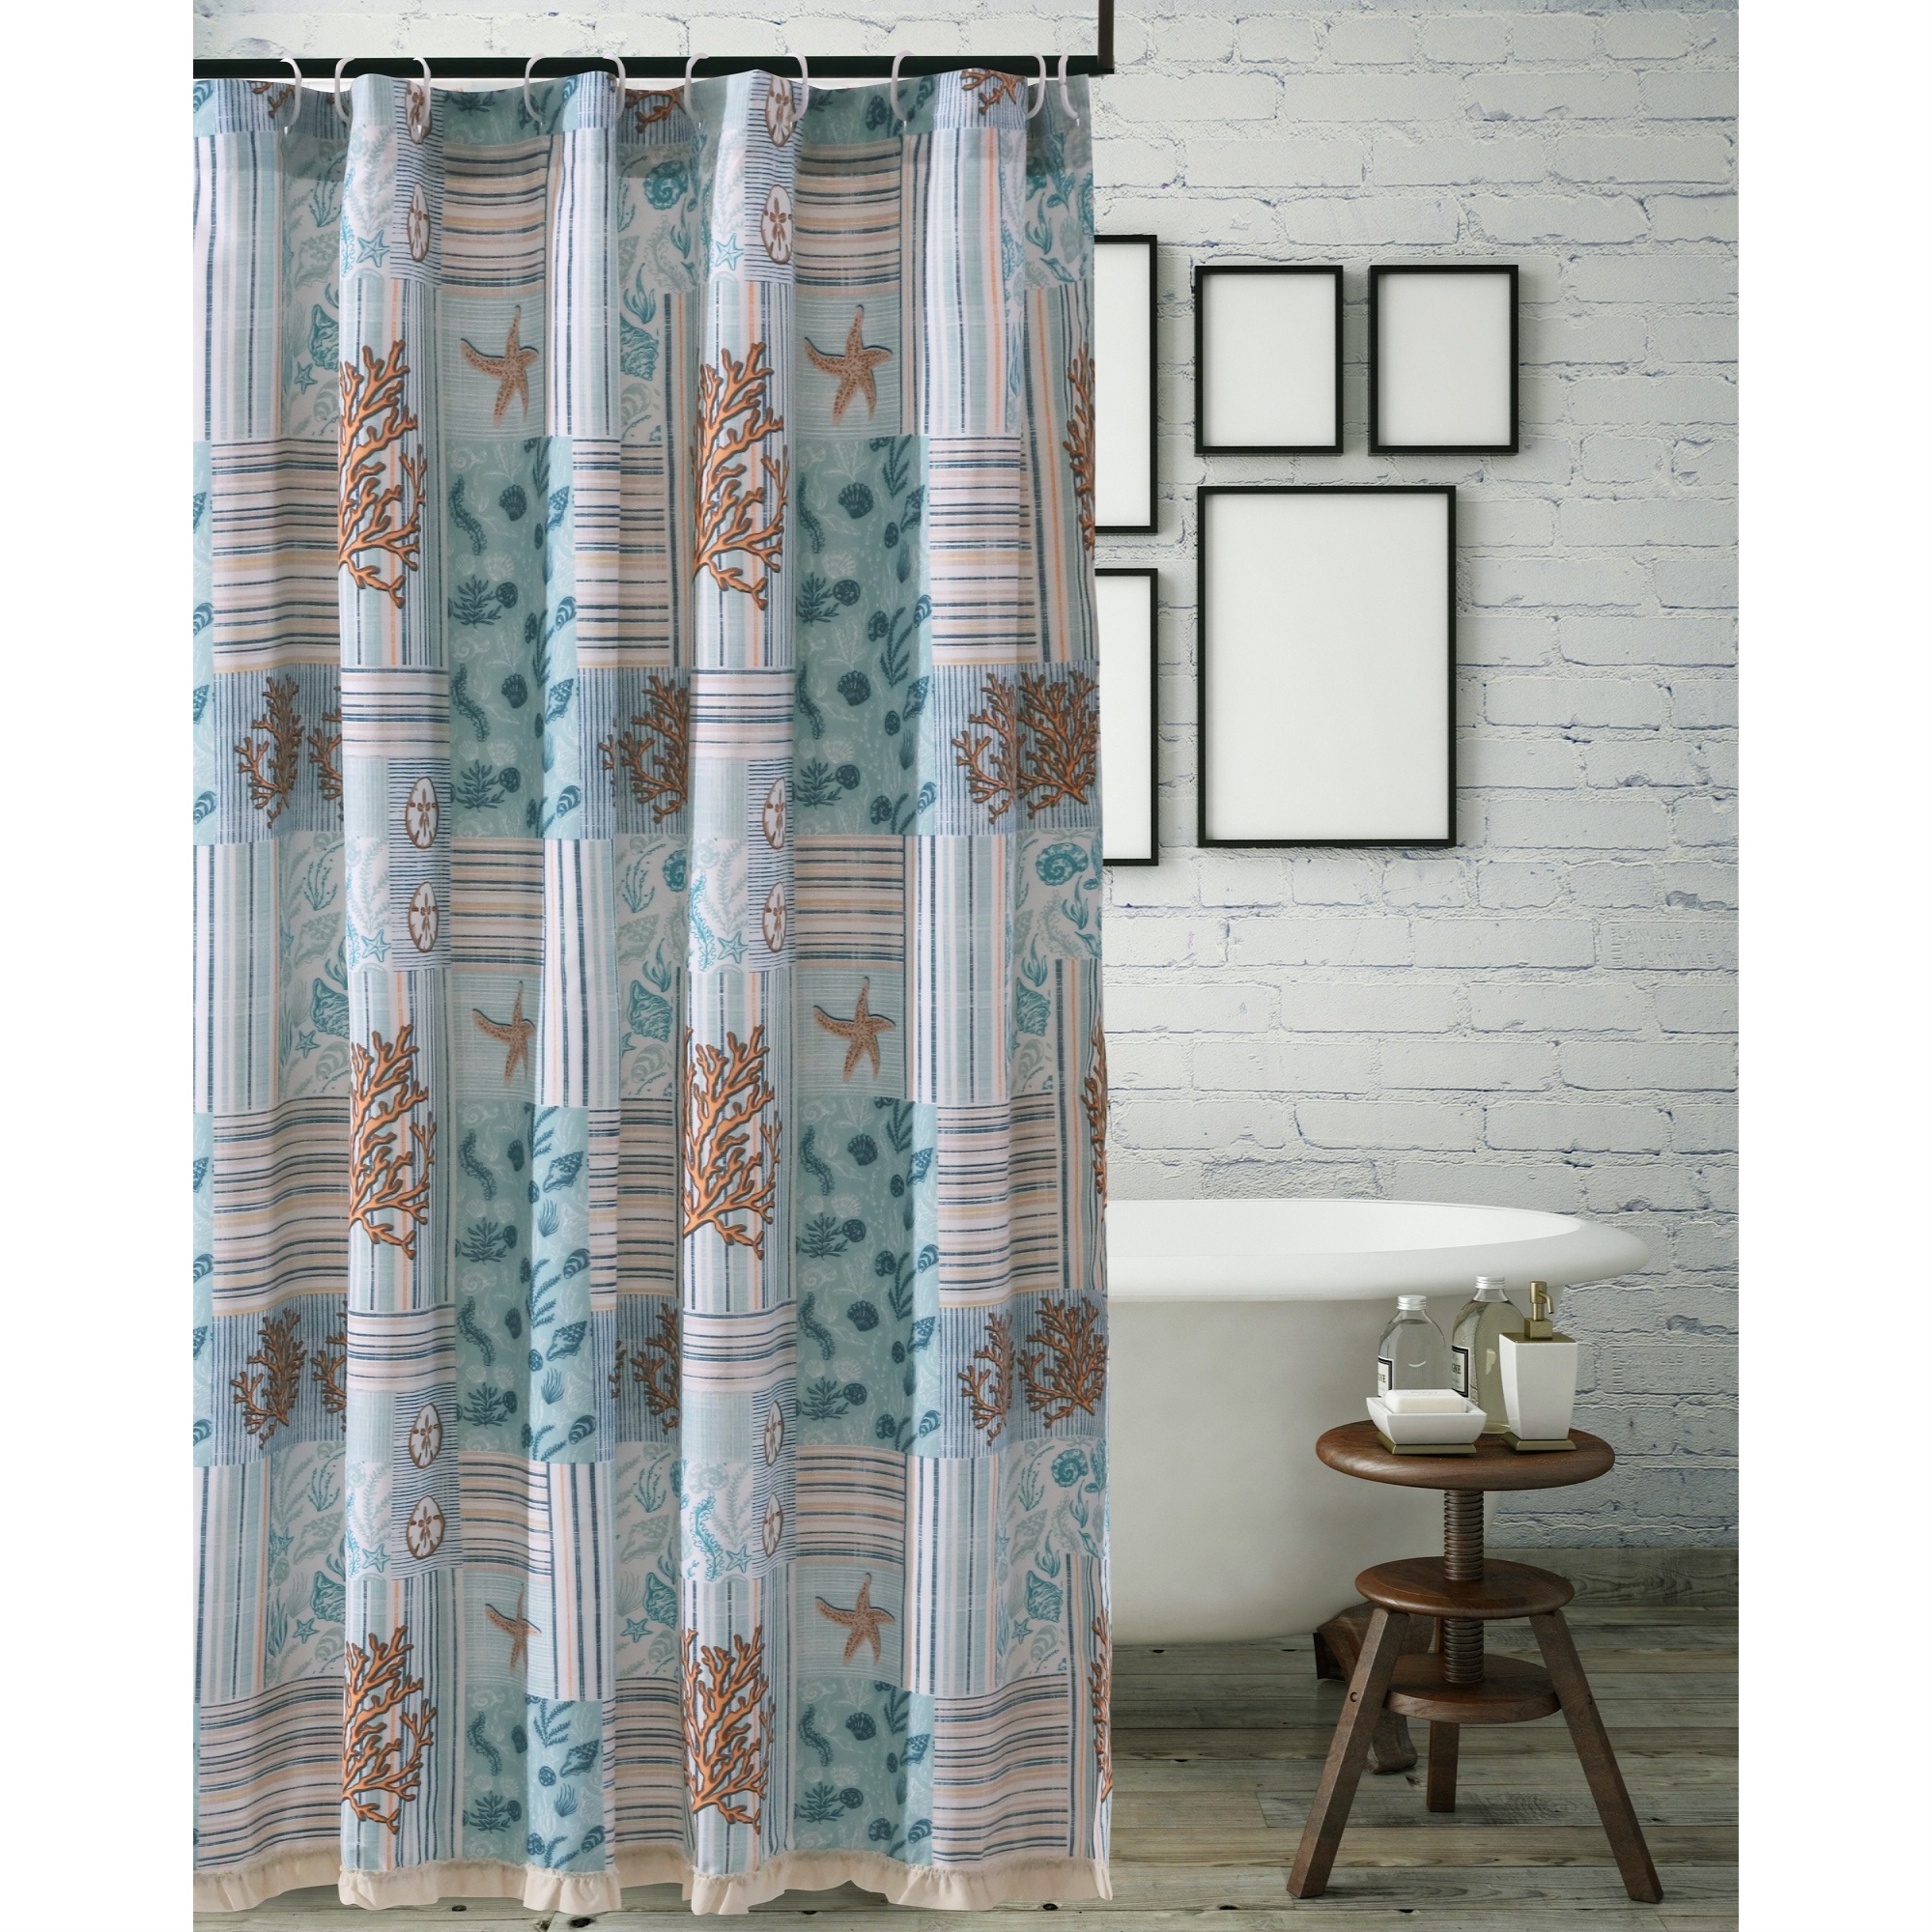 Benjara Sea Life Print Shower Curtain with Button holes, Blue and Brown